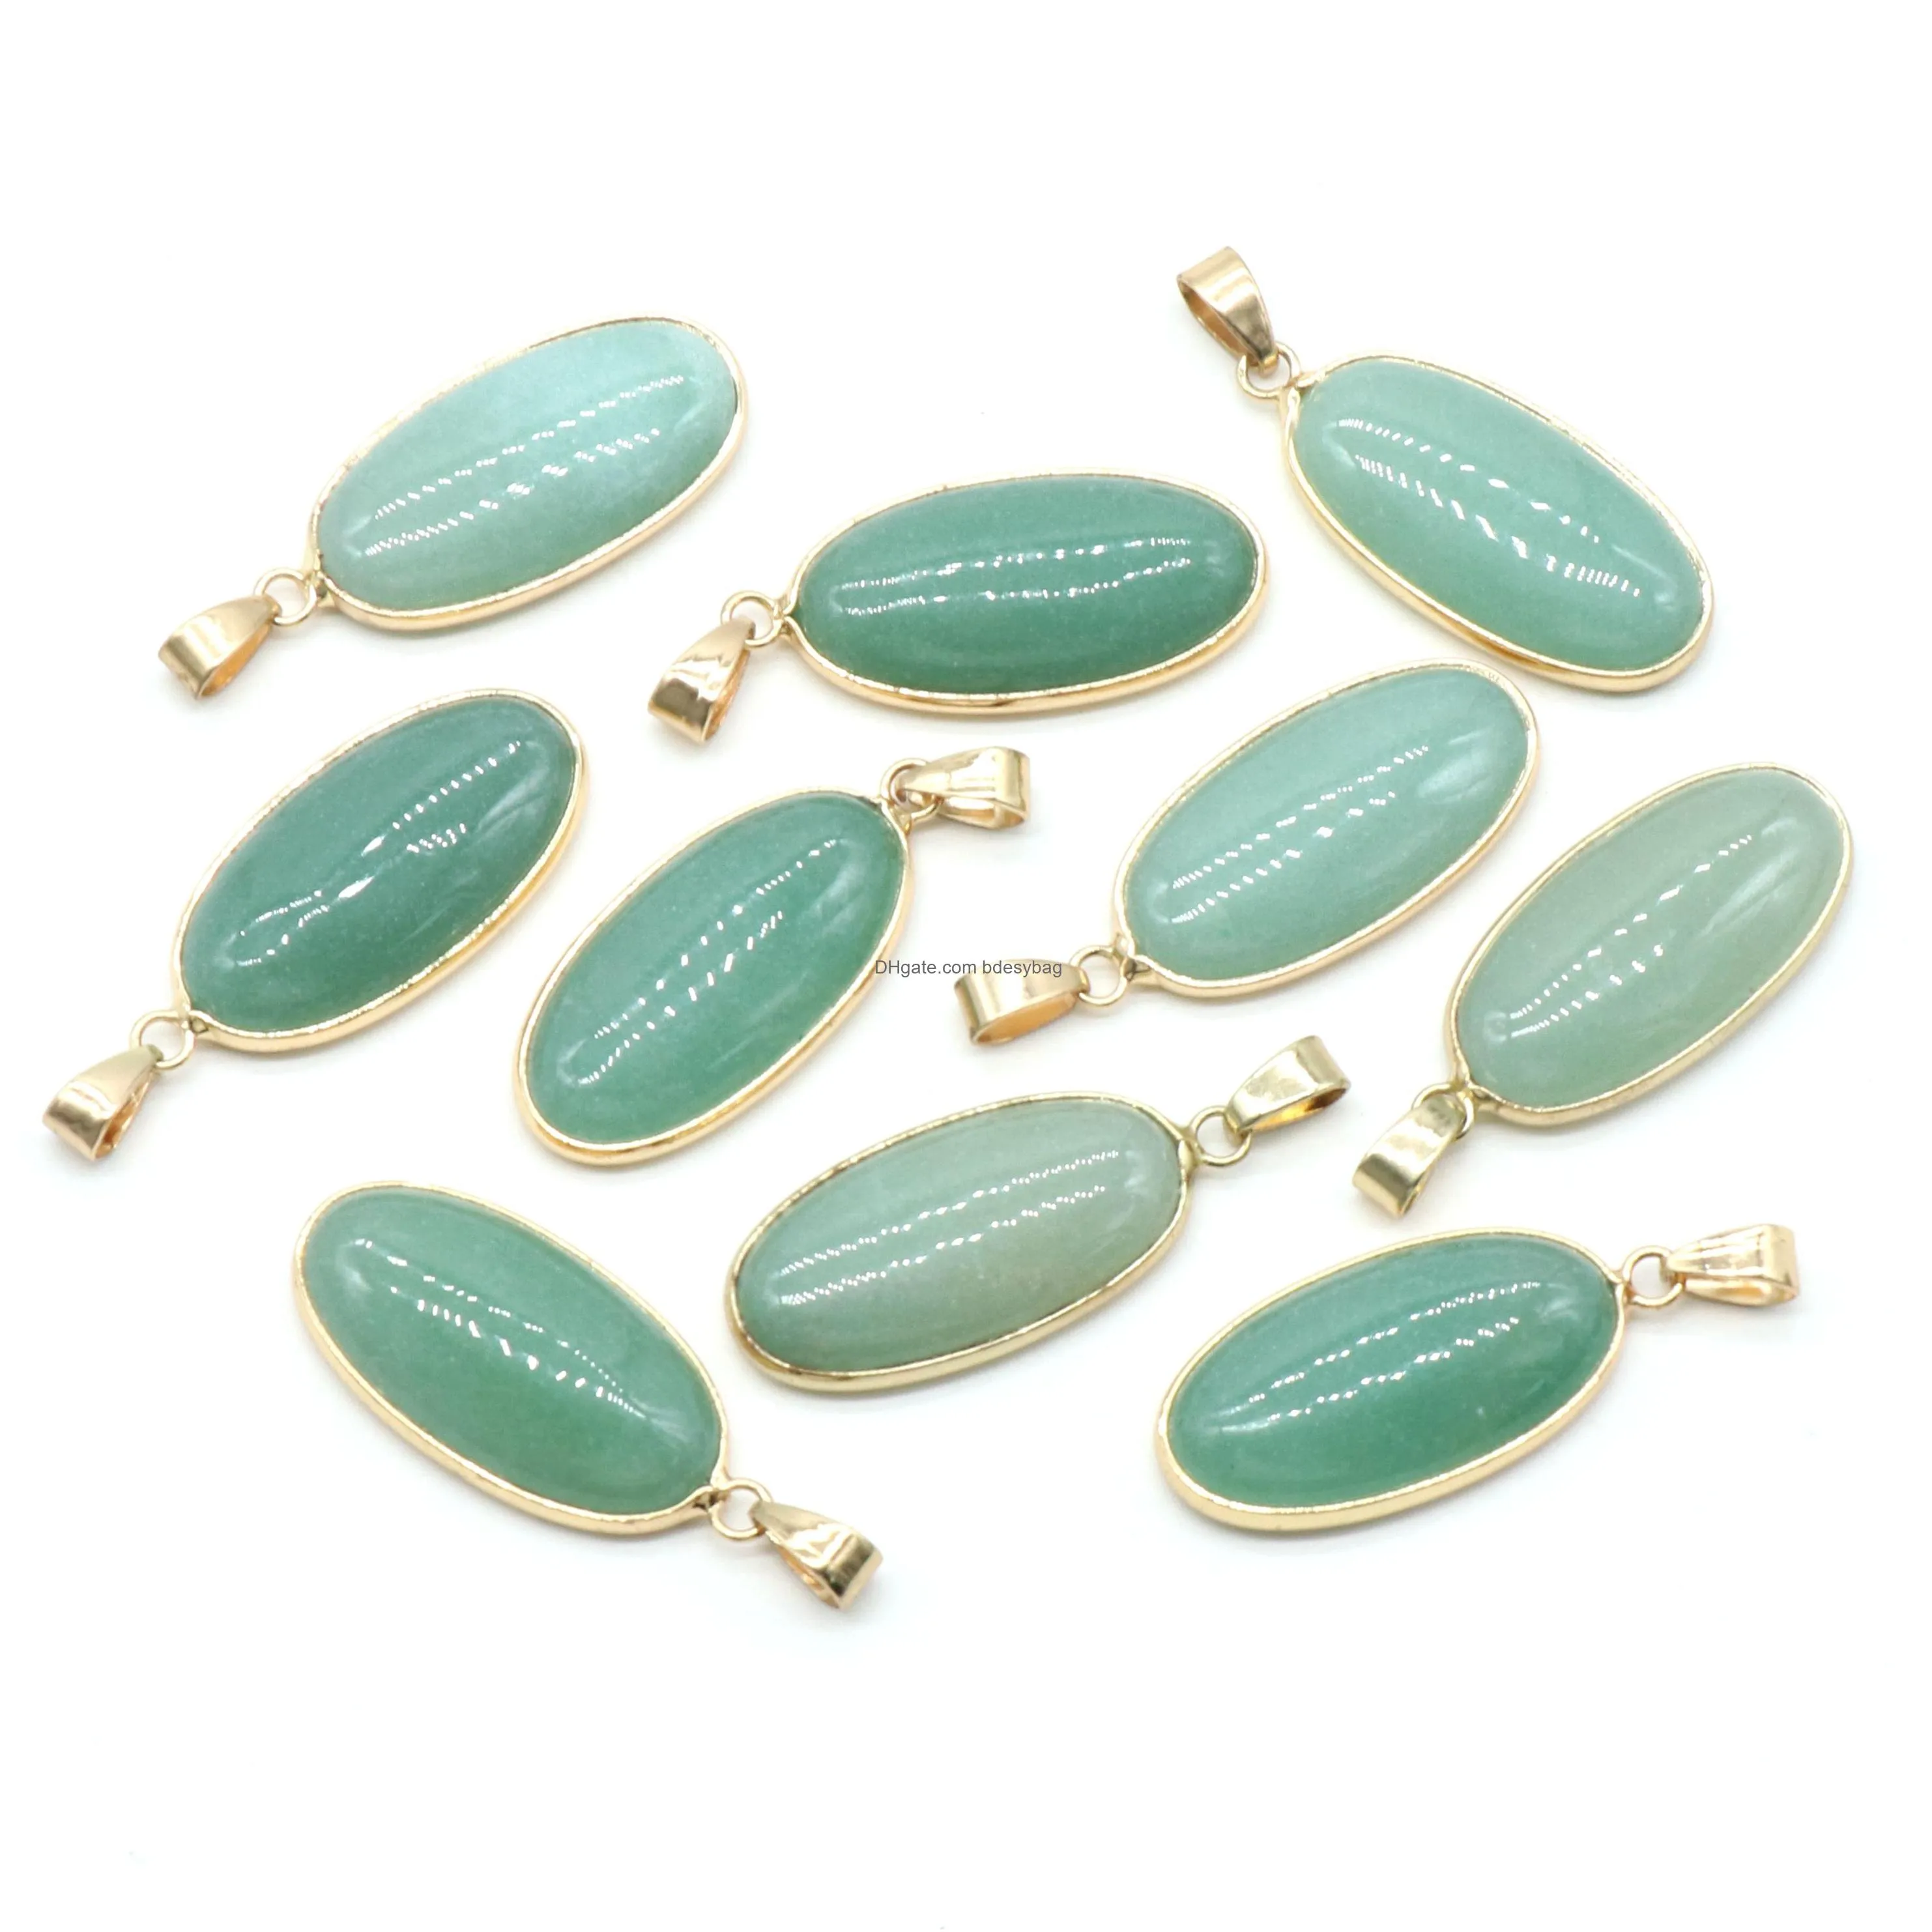 natural stone pendants waterdrop shape mixed stone agate unakite chakra healing stones charms for jewelry making necklace bracelet